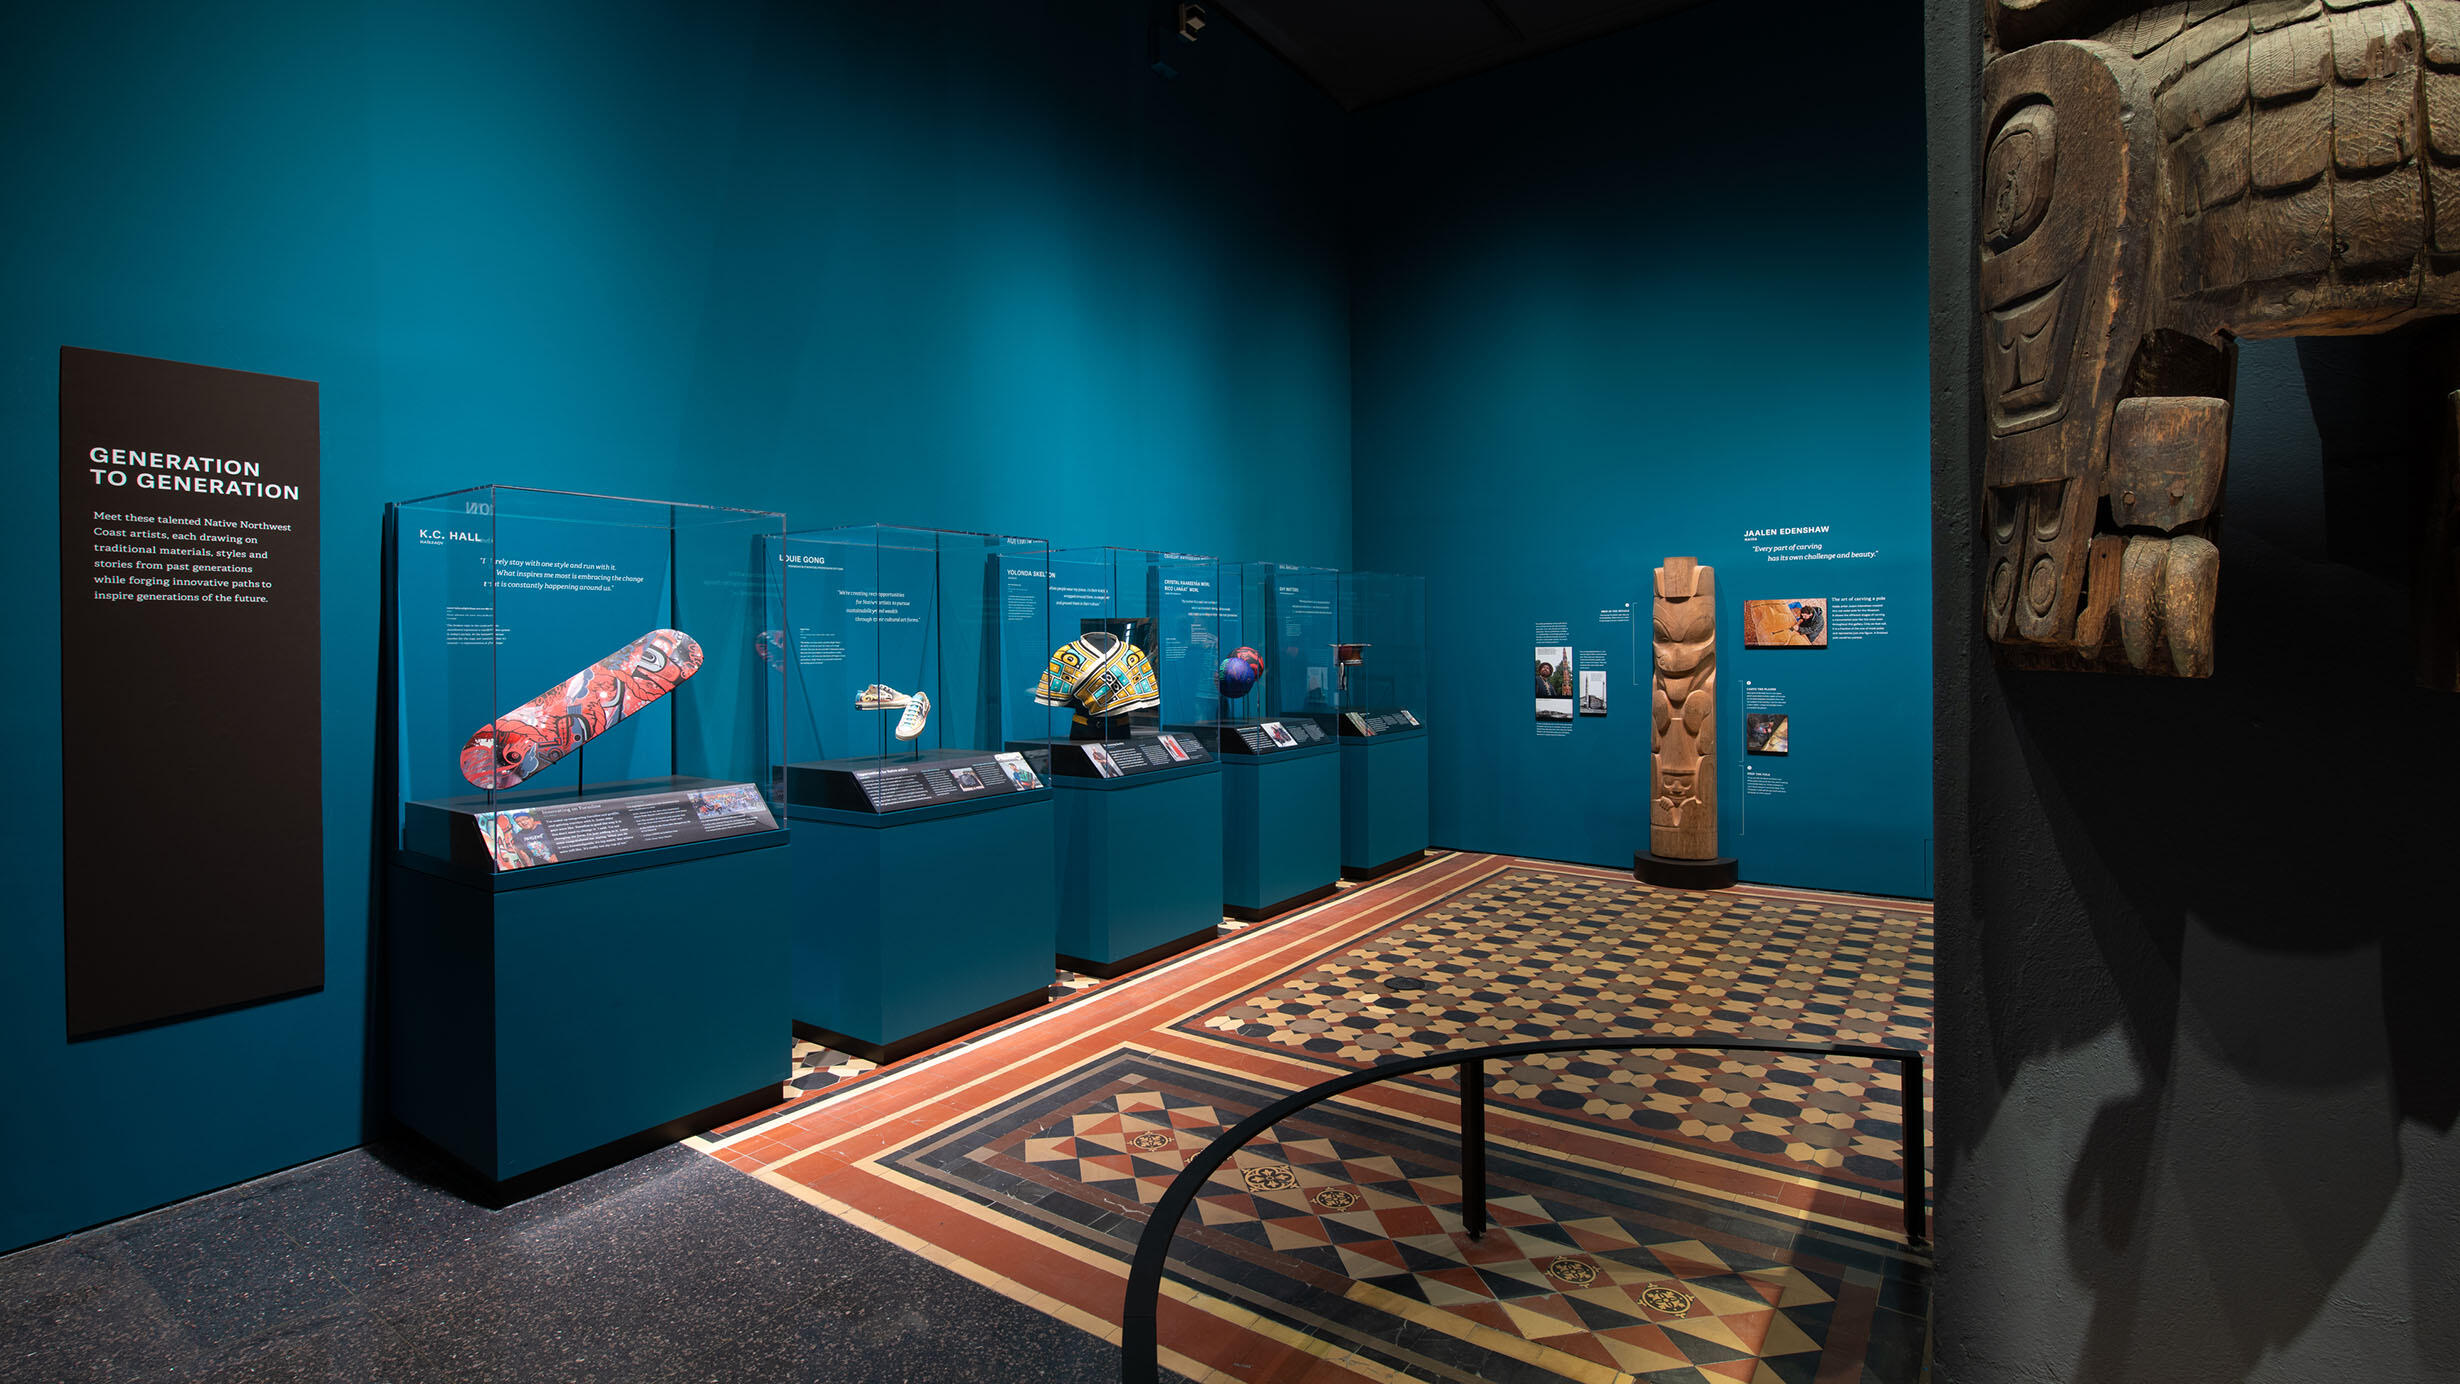 The Generation to Generation gallery within the Northwest Coast Hall contains a cedar pole carving and glass display cases containing works of art.